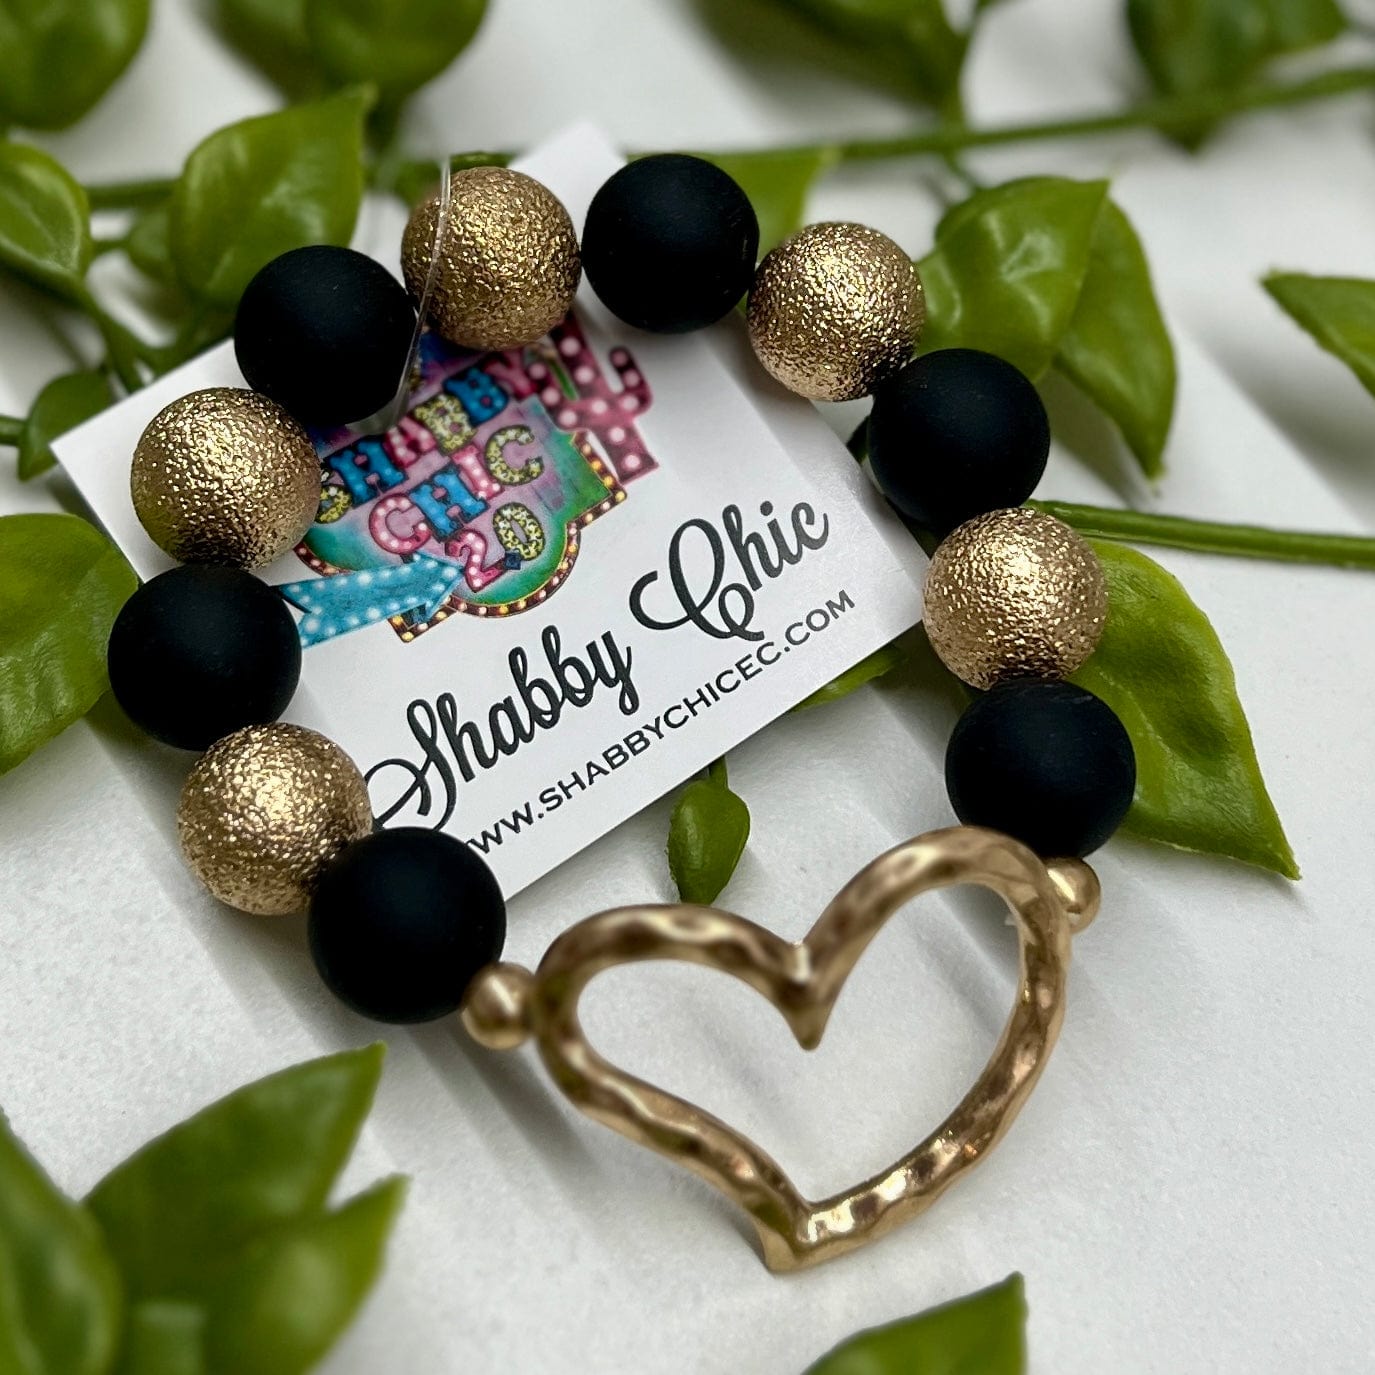 Beaded Heart Bracelet Shabby Chic Boutique and Tanning Salon Black/Gold